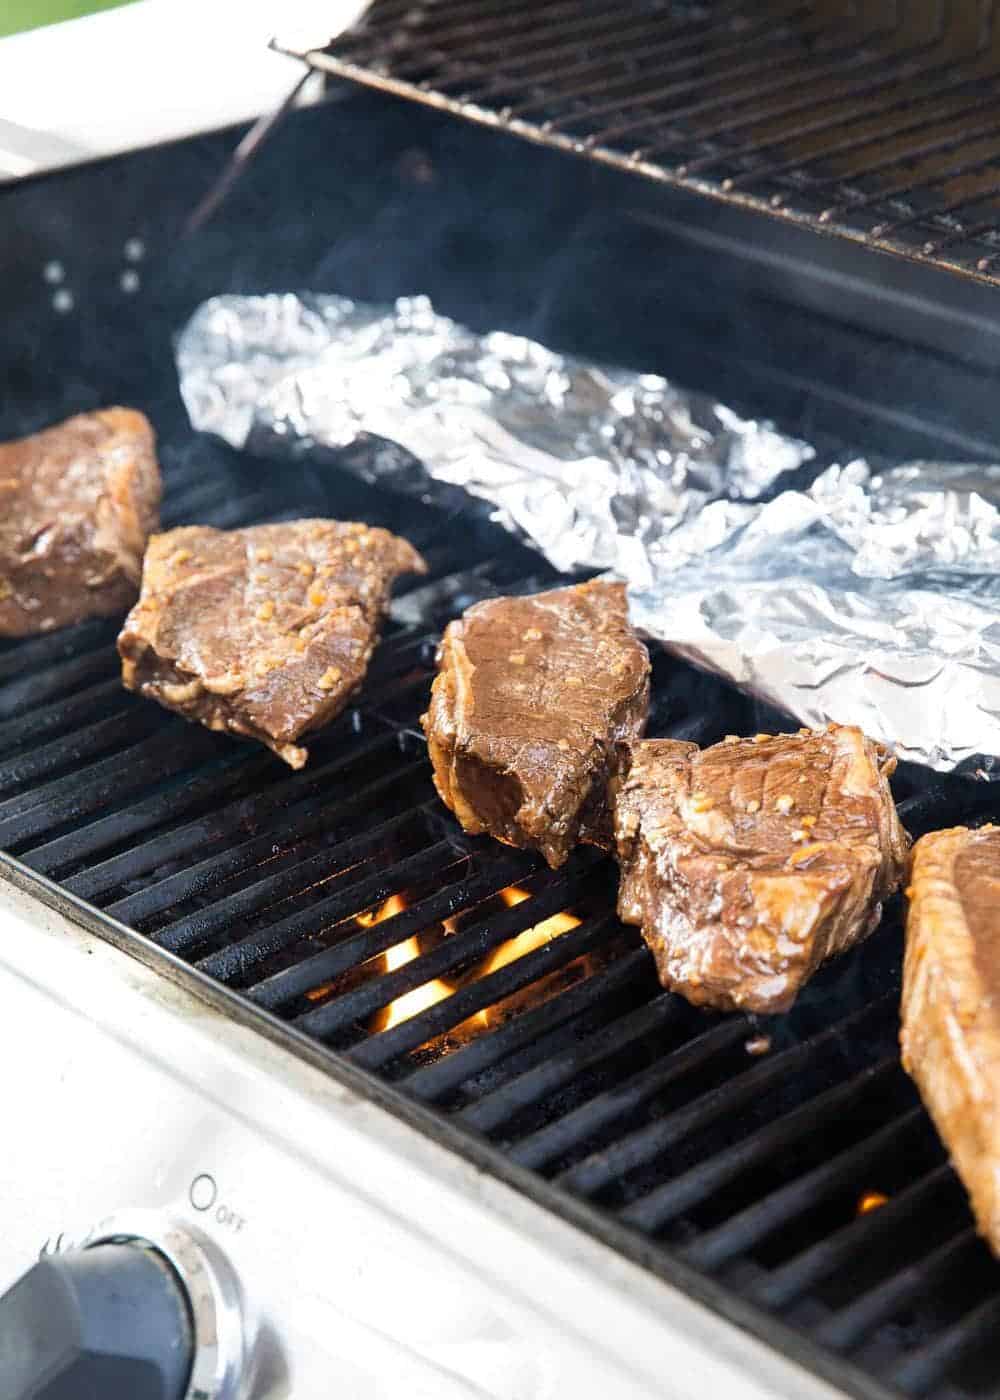 steaks cooking on grill 